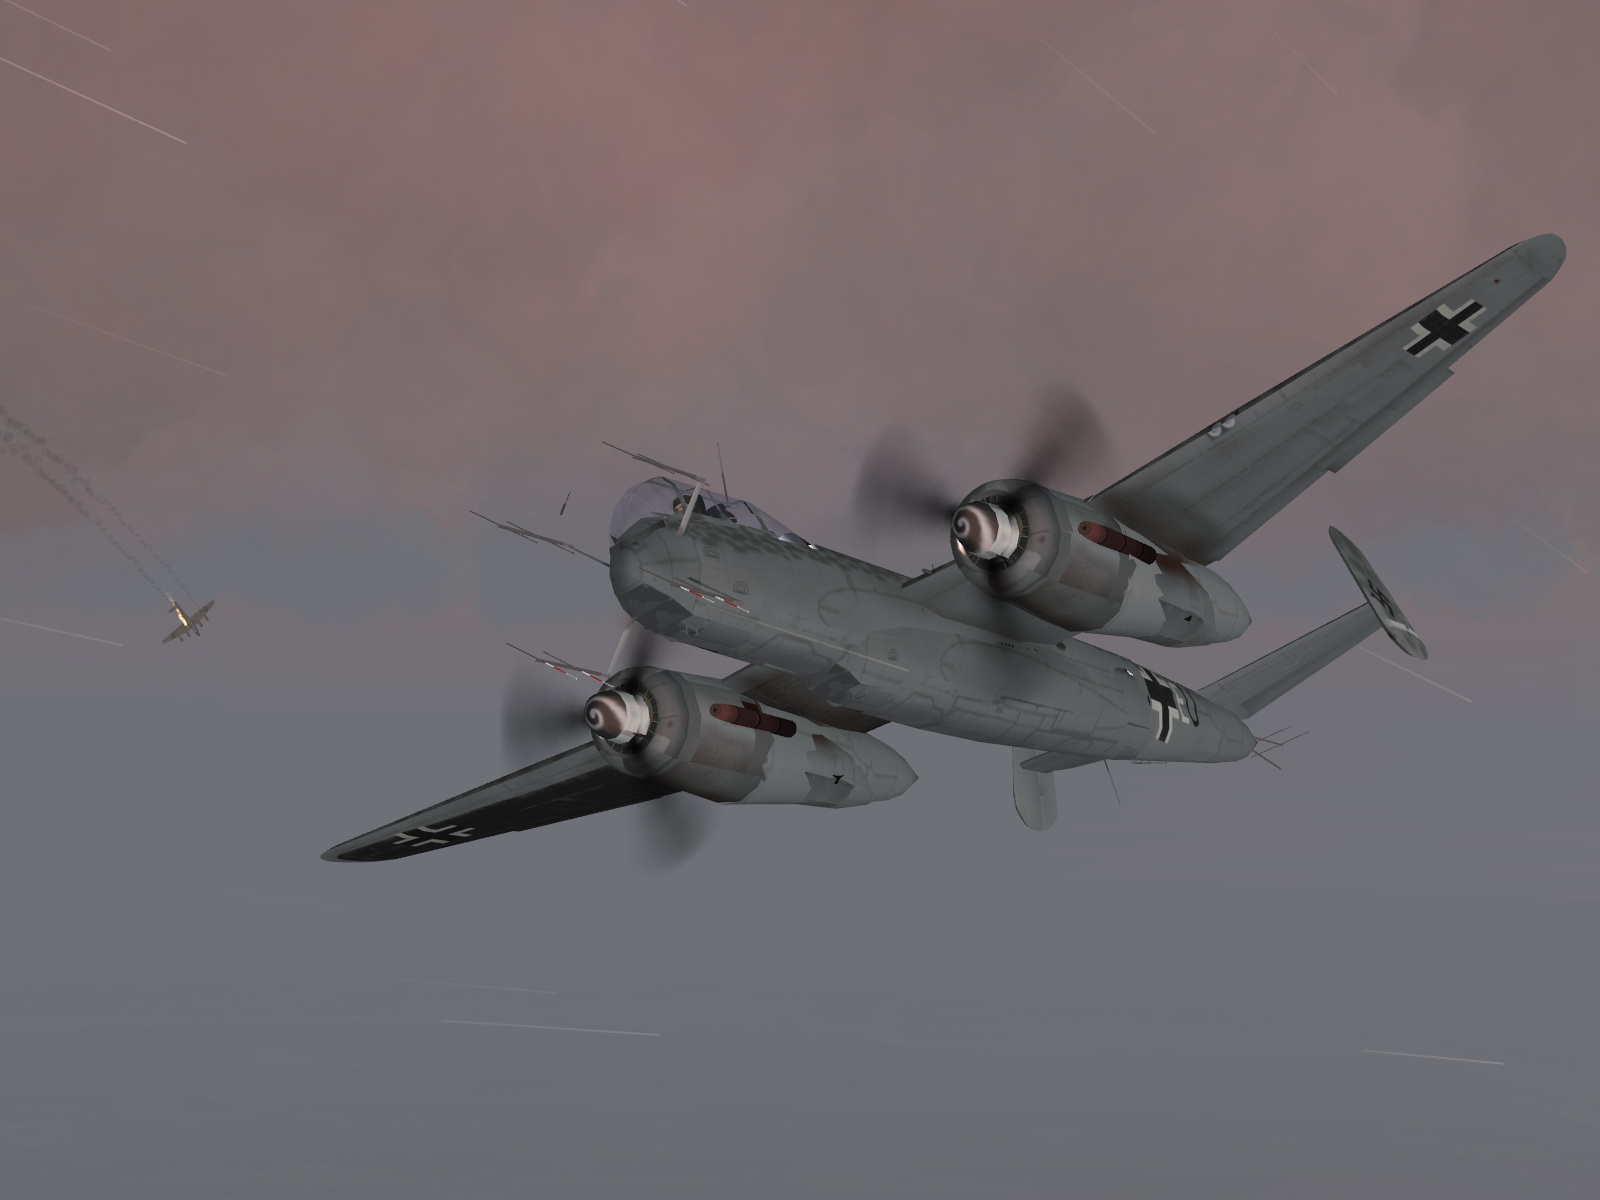 IL2 MH He 219A Nachtjager in aerial combat with a RAF Lancaster 04